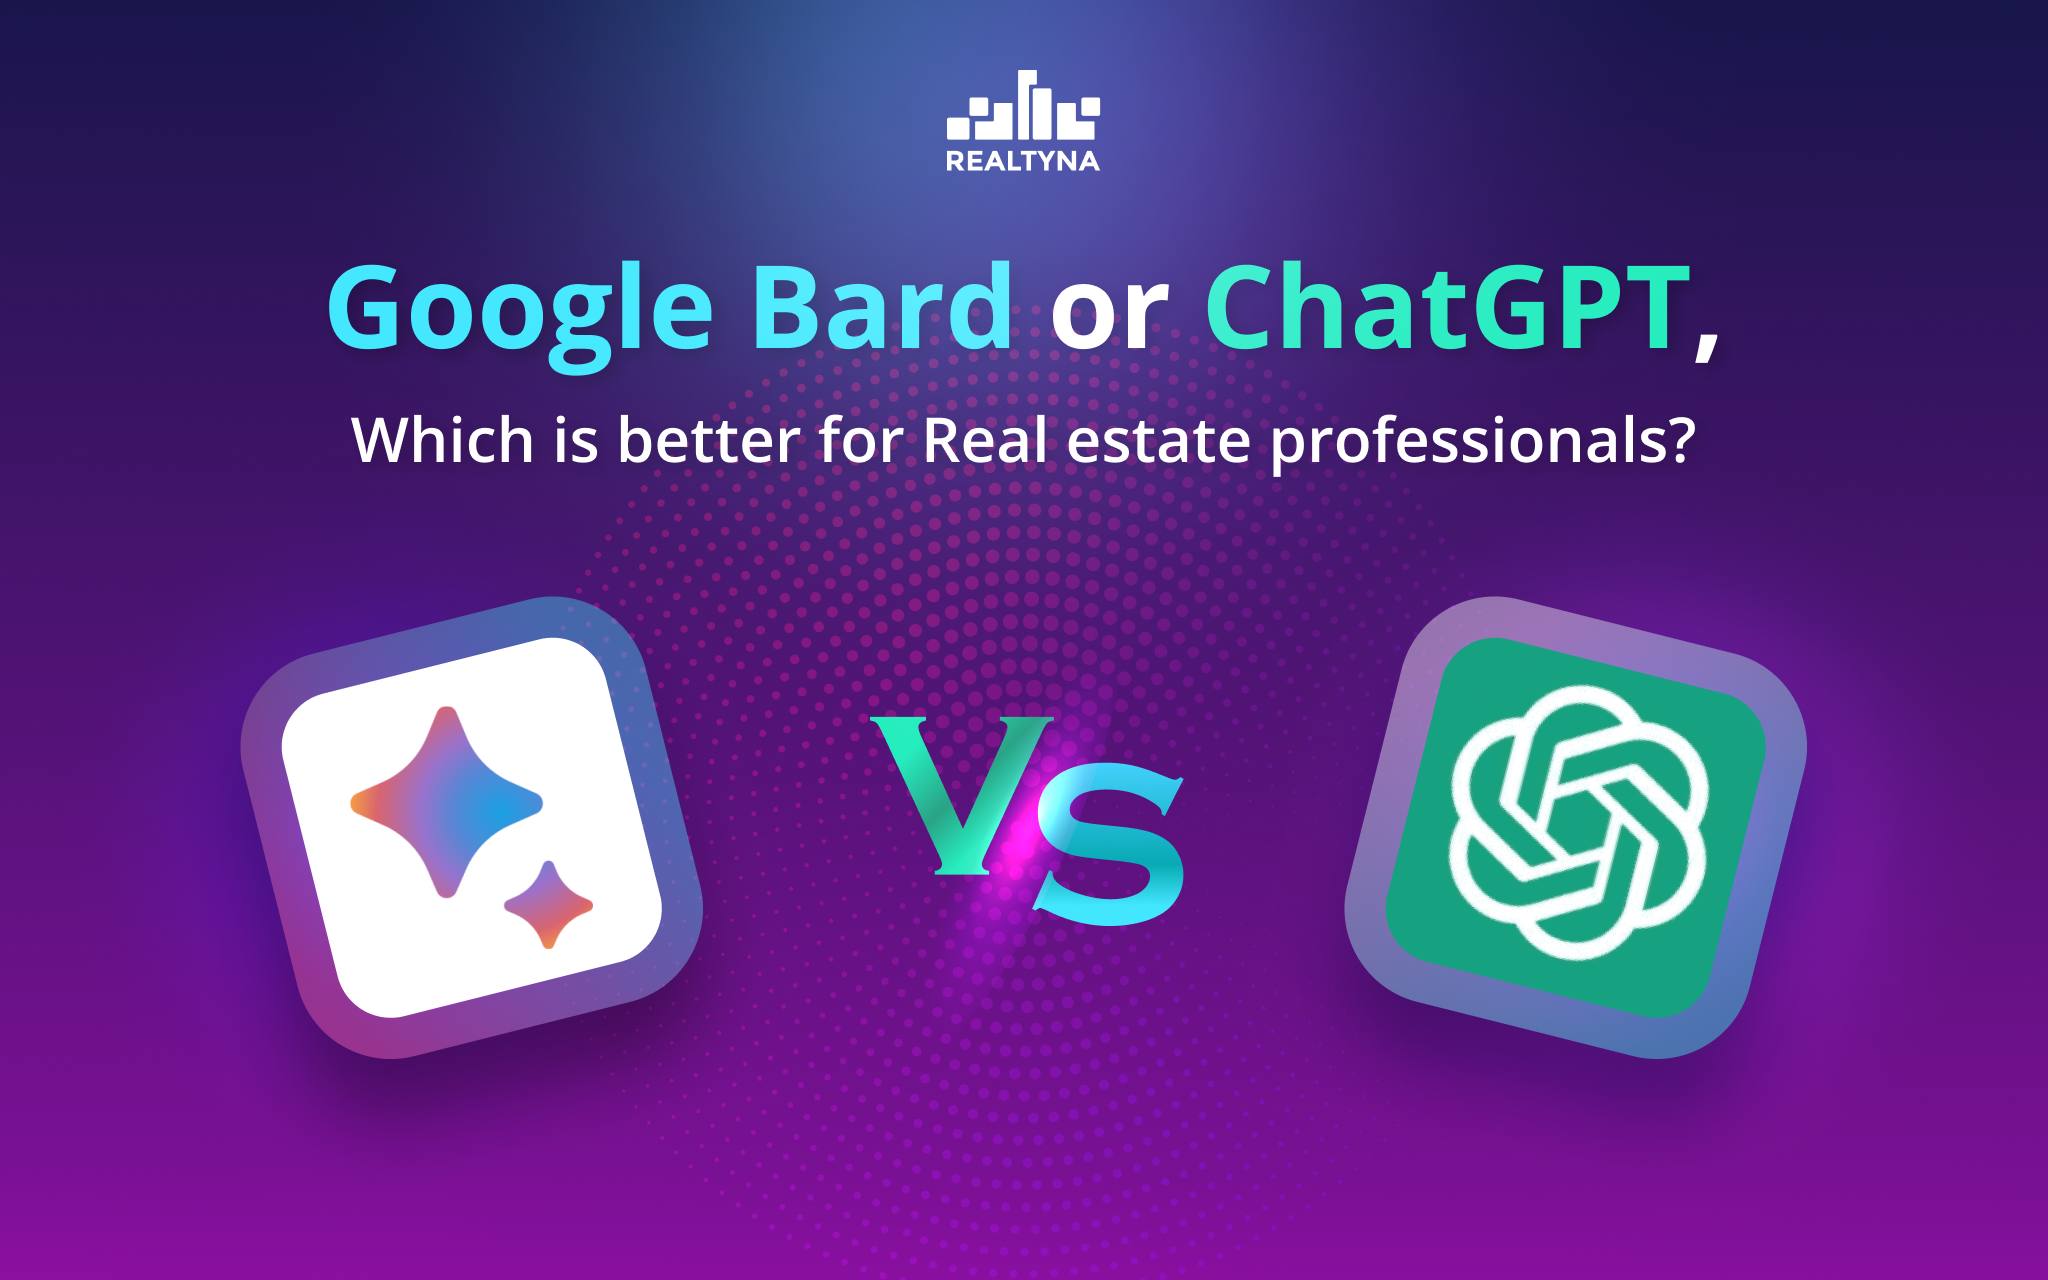 Google Bard or ChatGPT, Which is better for Real estate professionals?